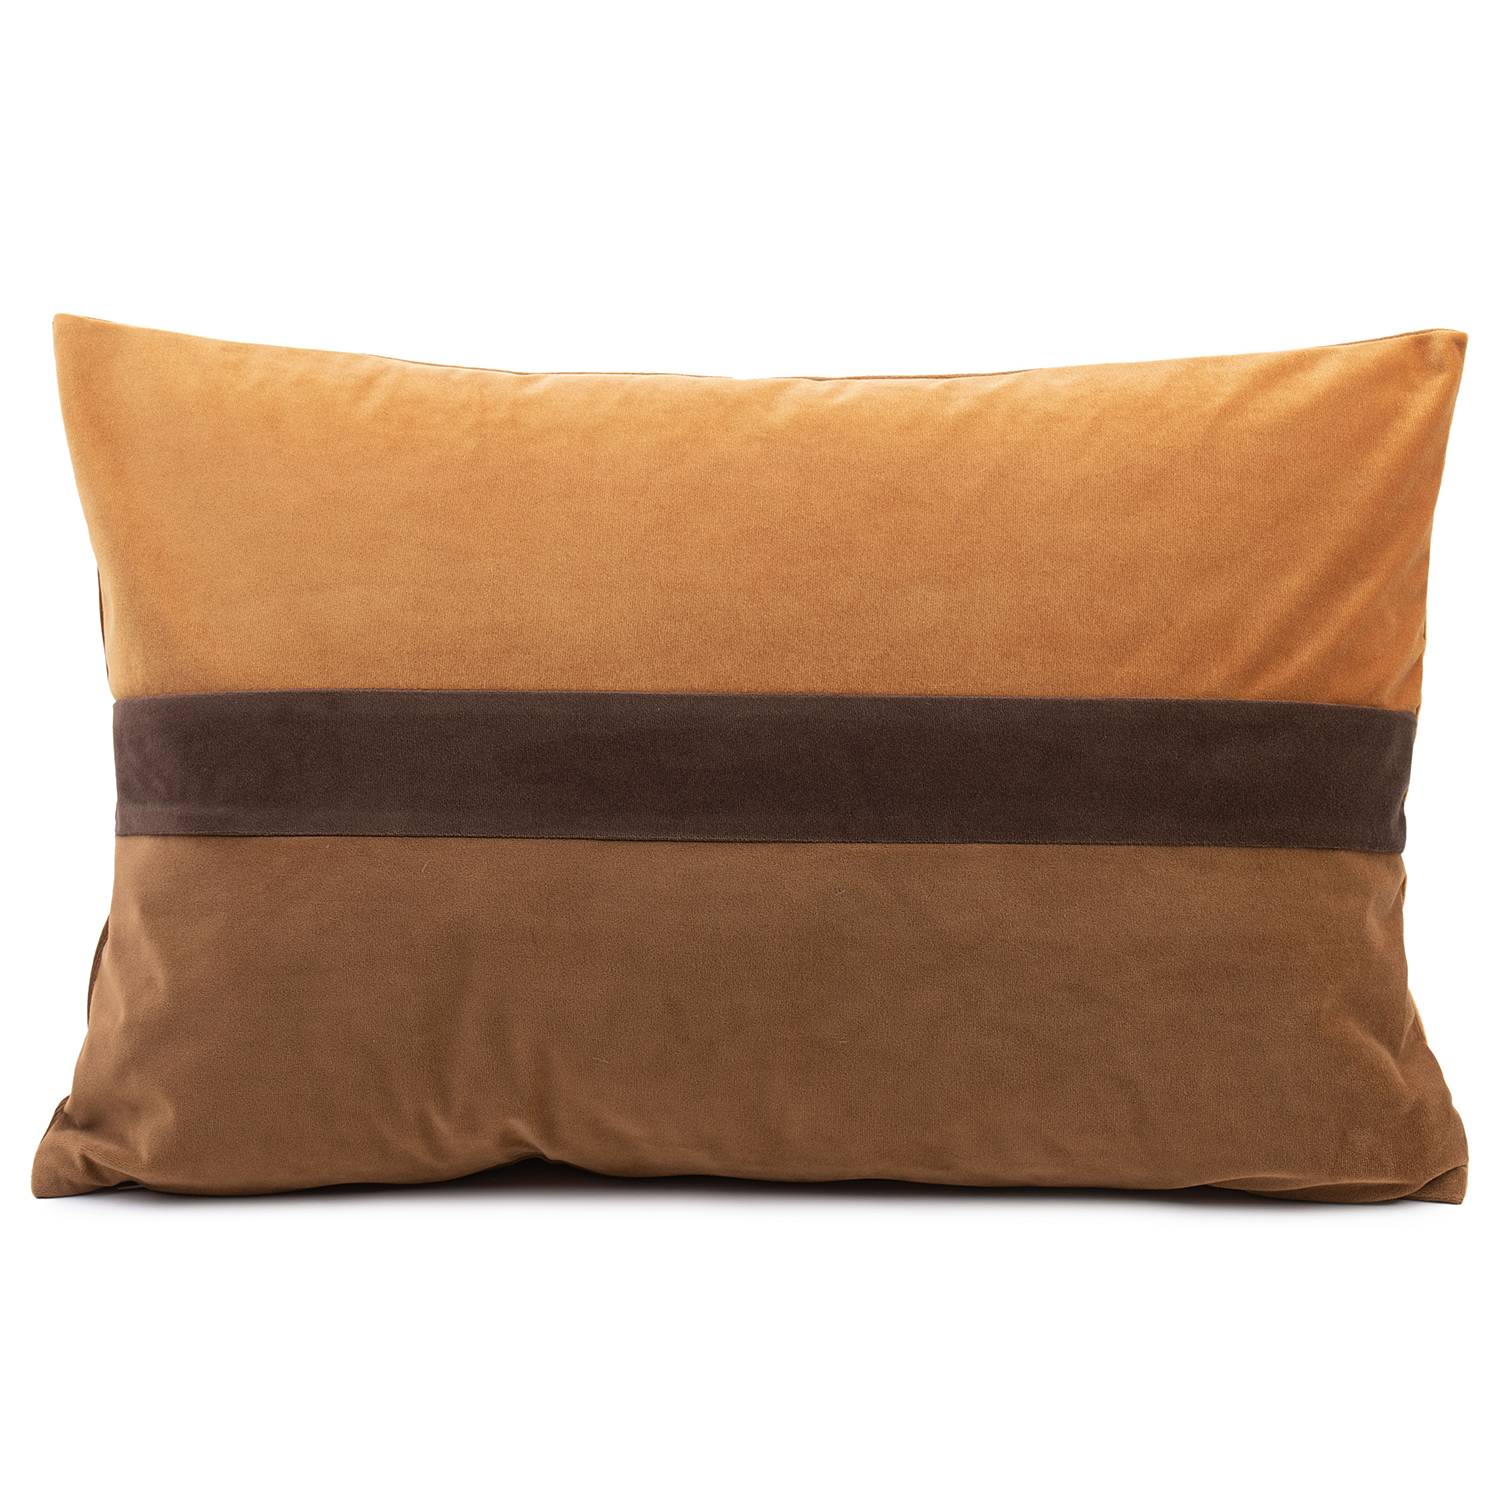 Image of Housse de coussin Pino 000000001000243551